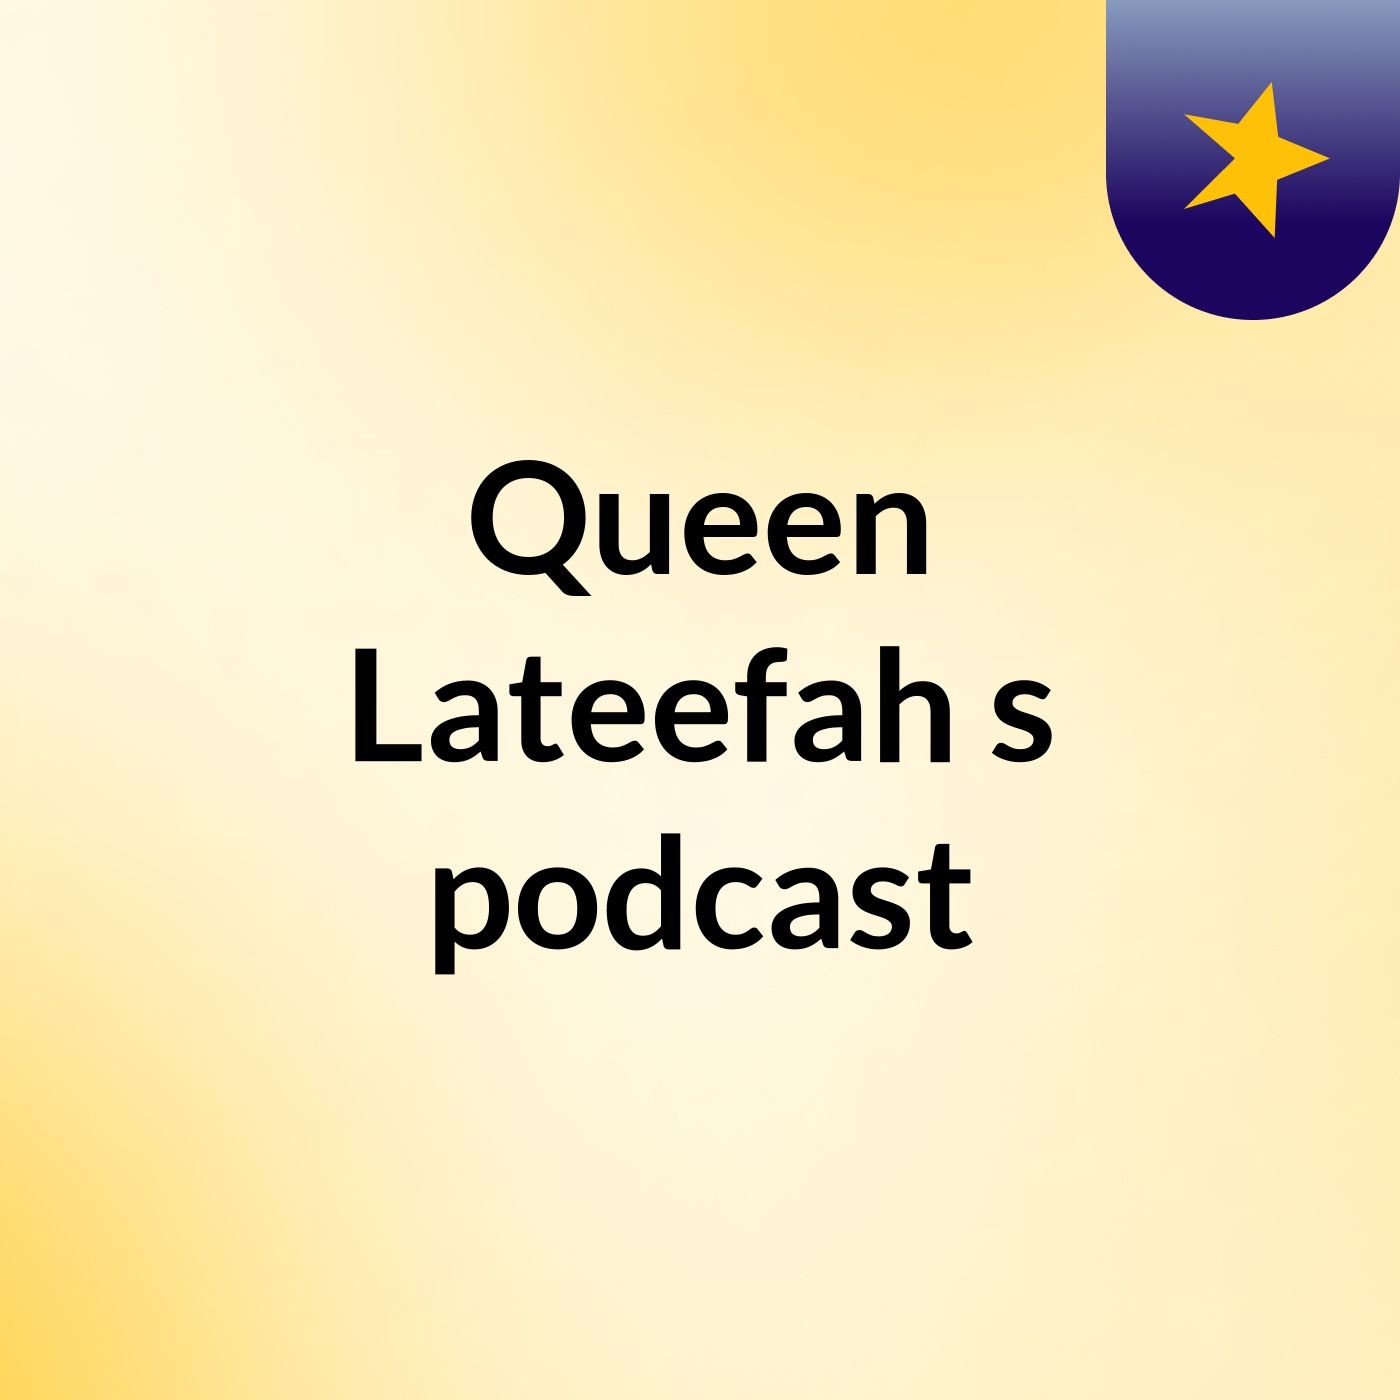 Queen Lateefah's podcast